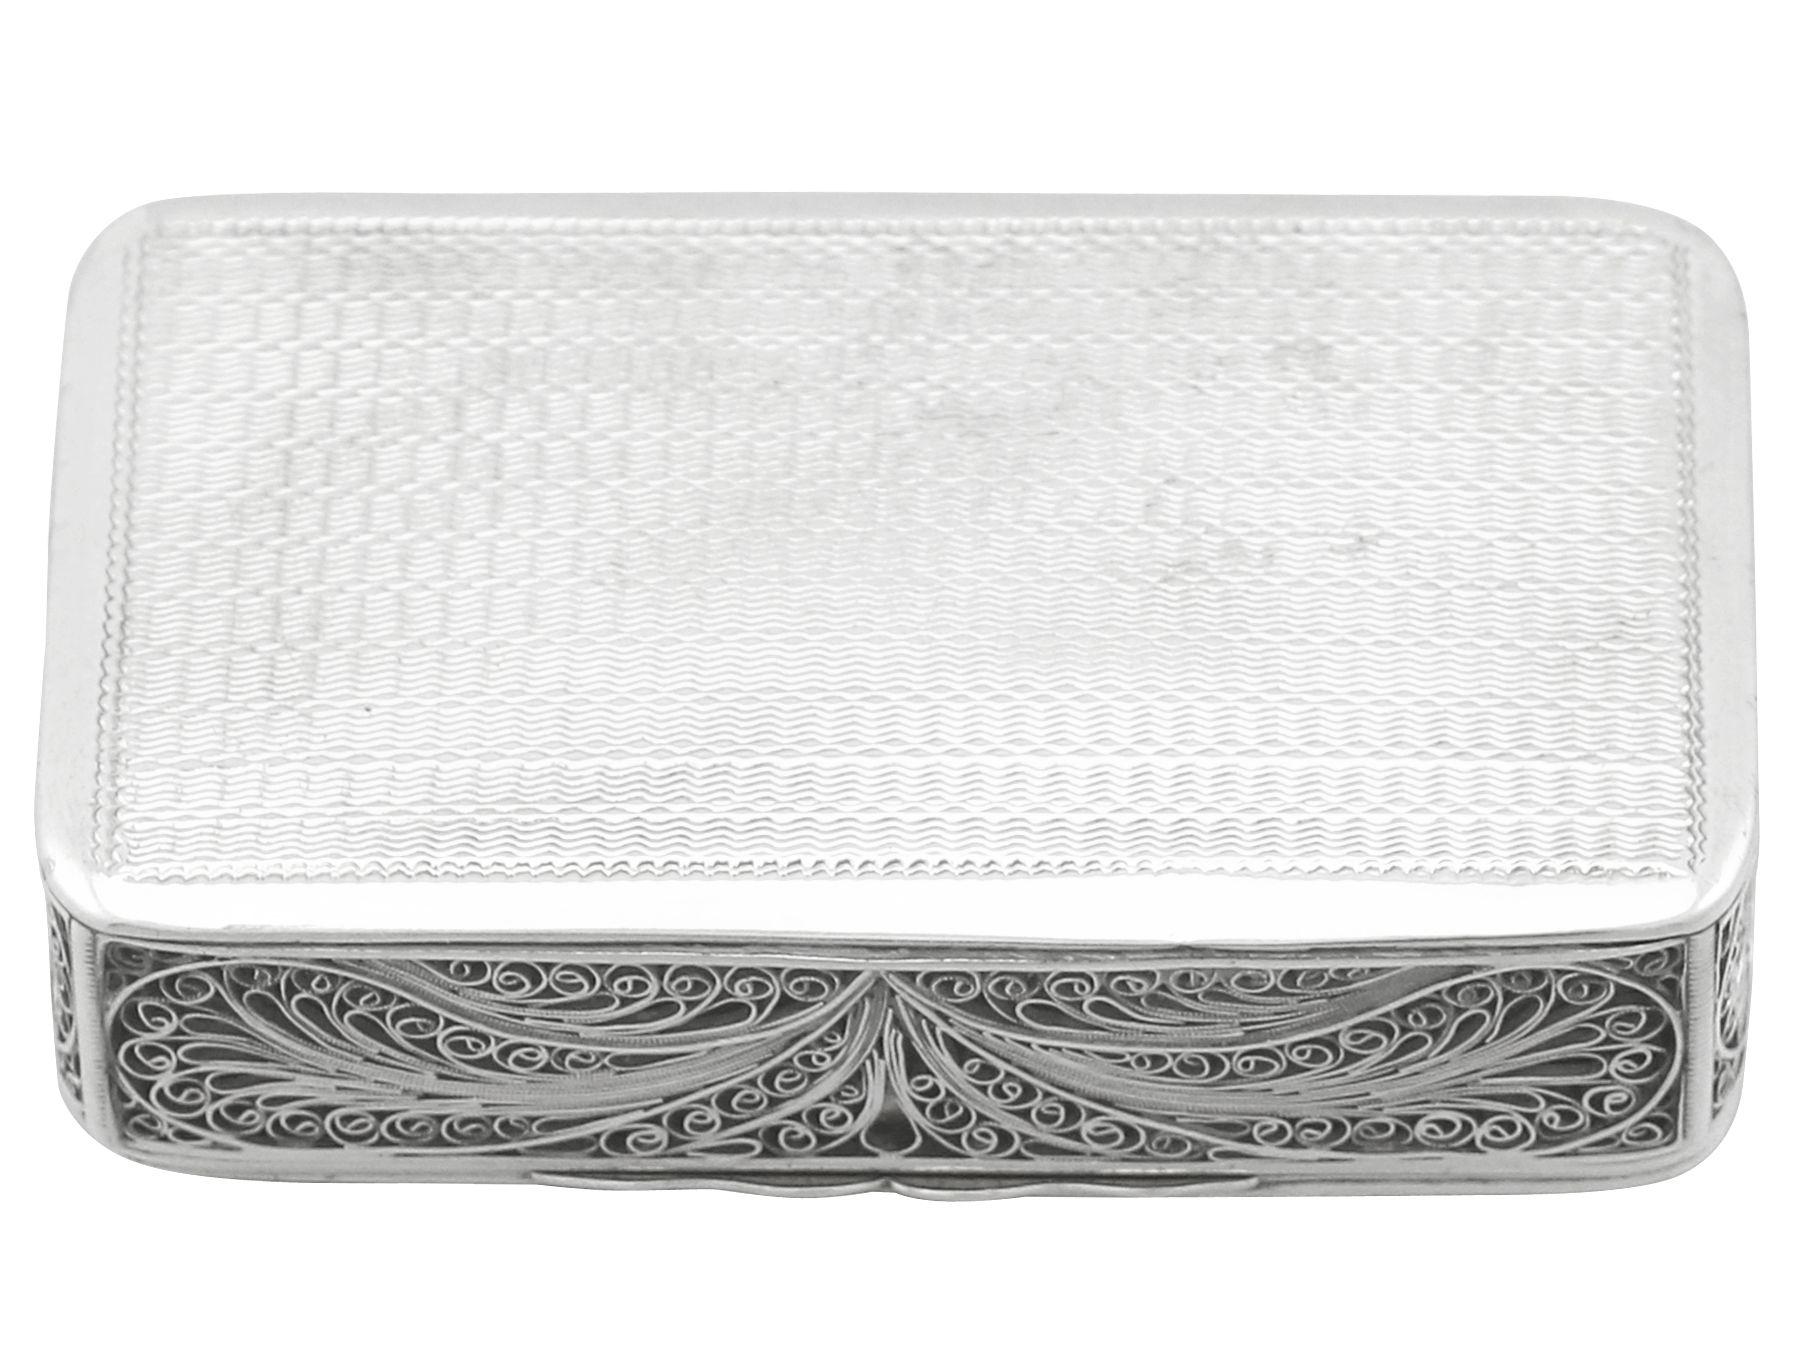 An exceptional, fine and impressive unusual antique Victorian English sterling silver filigree box; an addition to our ornamental silverware collection.

This exceptional antique Victorian sterling silver box has a rectangular form with rounded